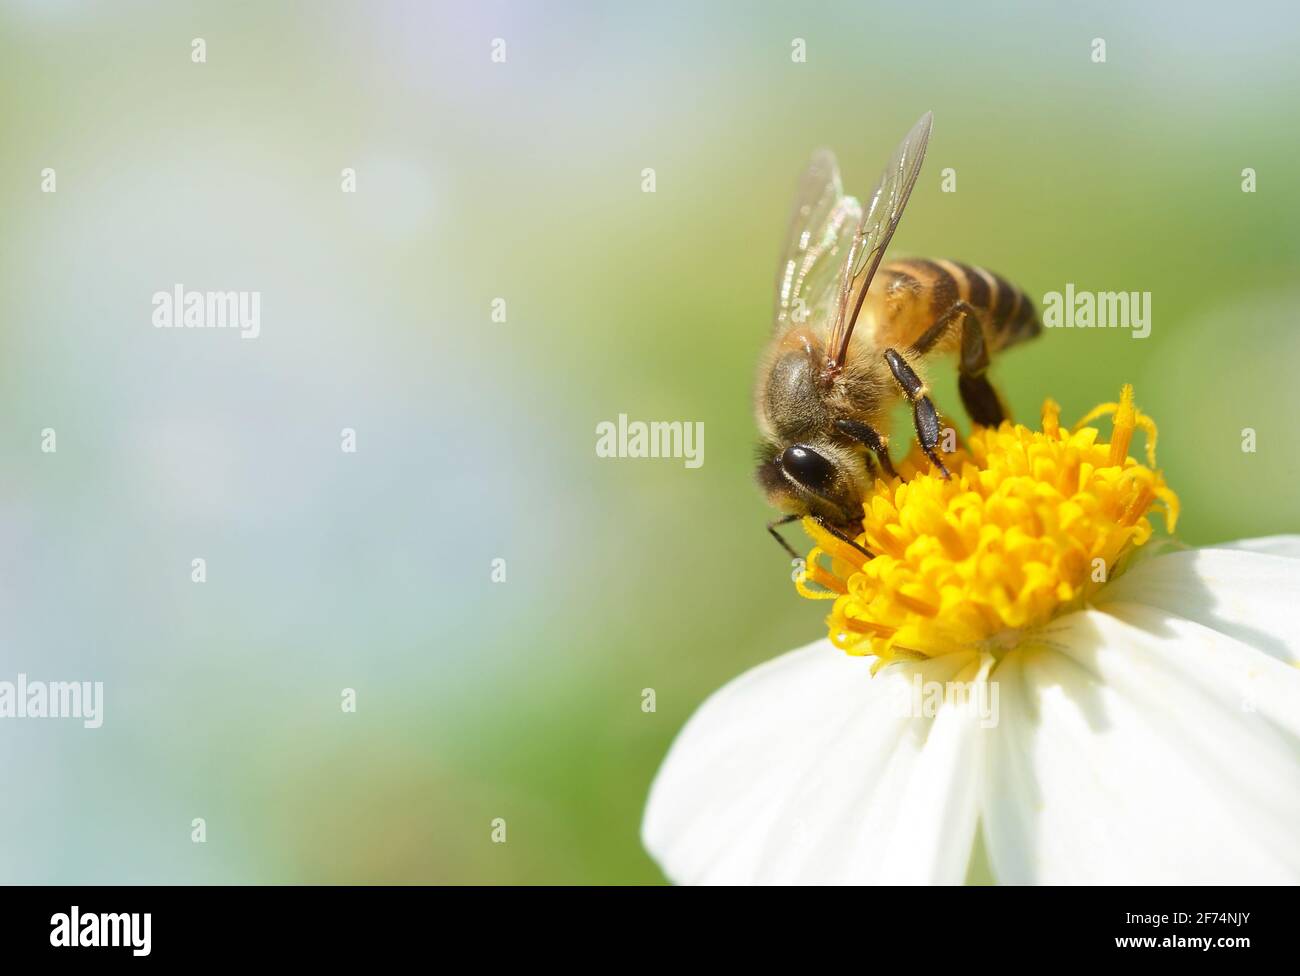 Bee on flower with soft blurred background Stock Photo